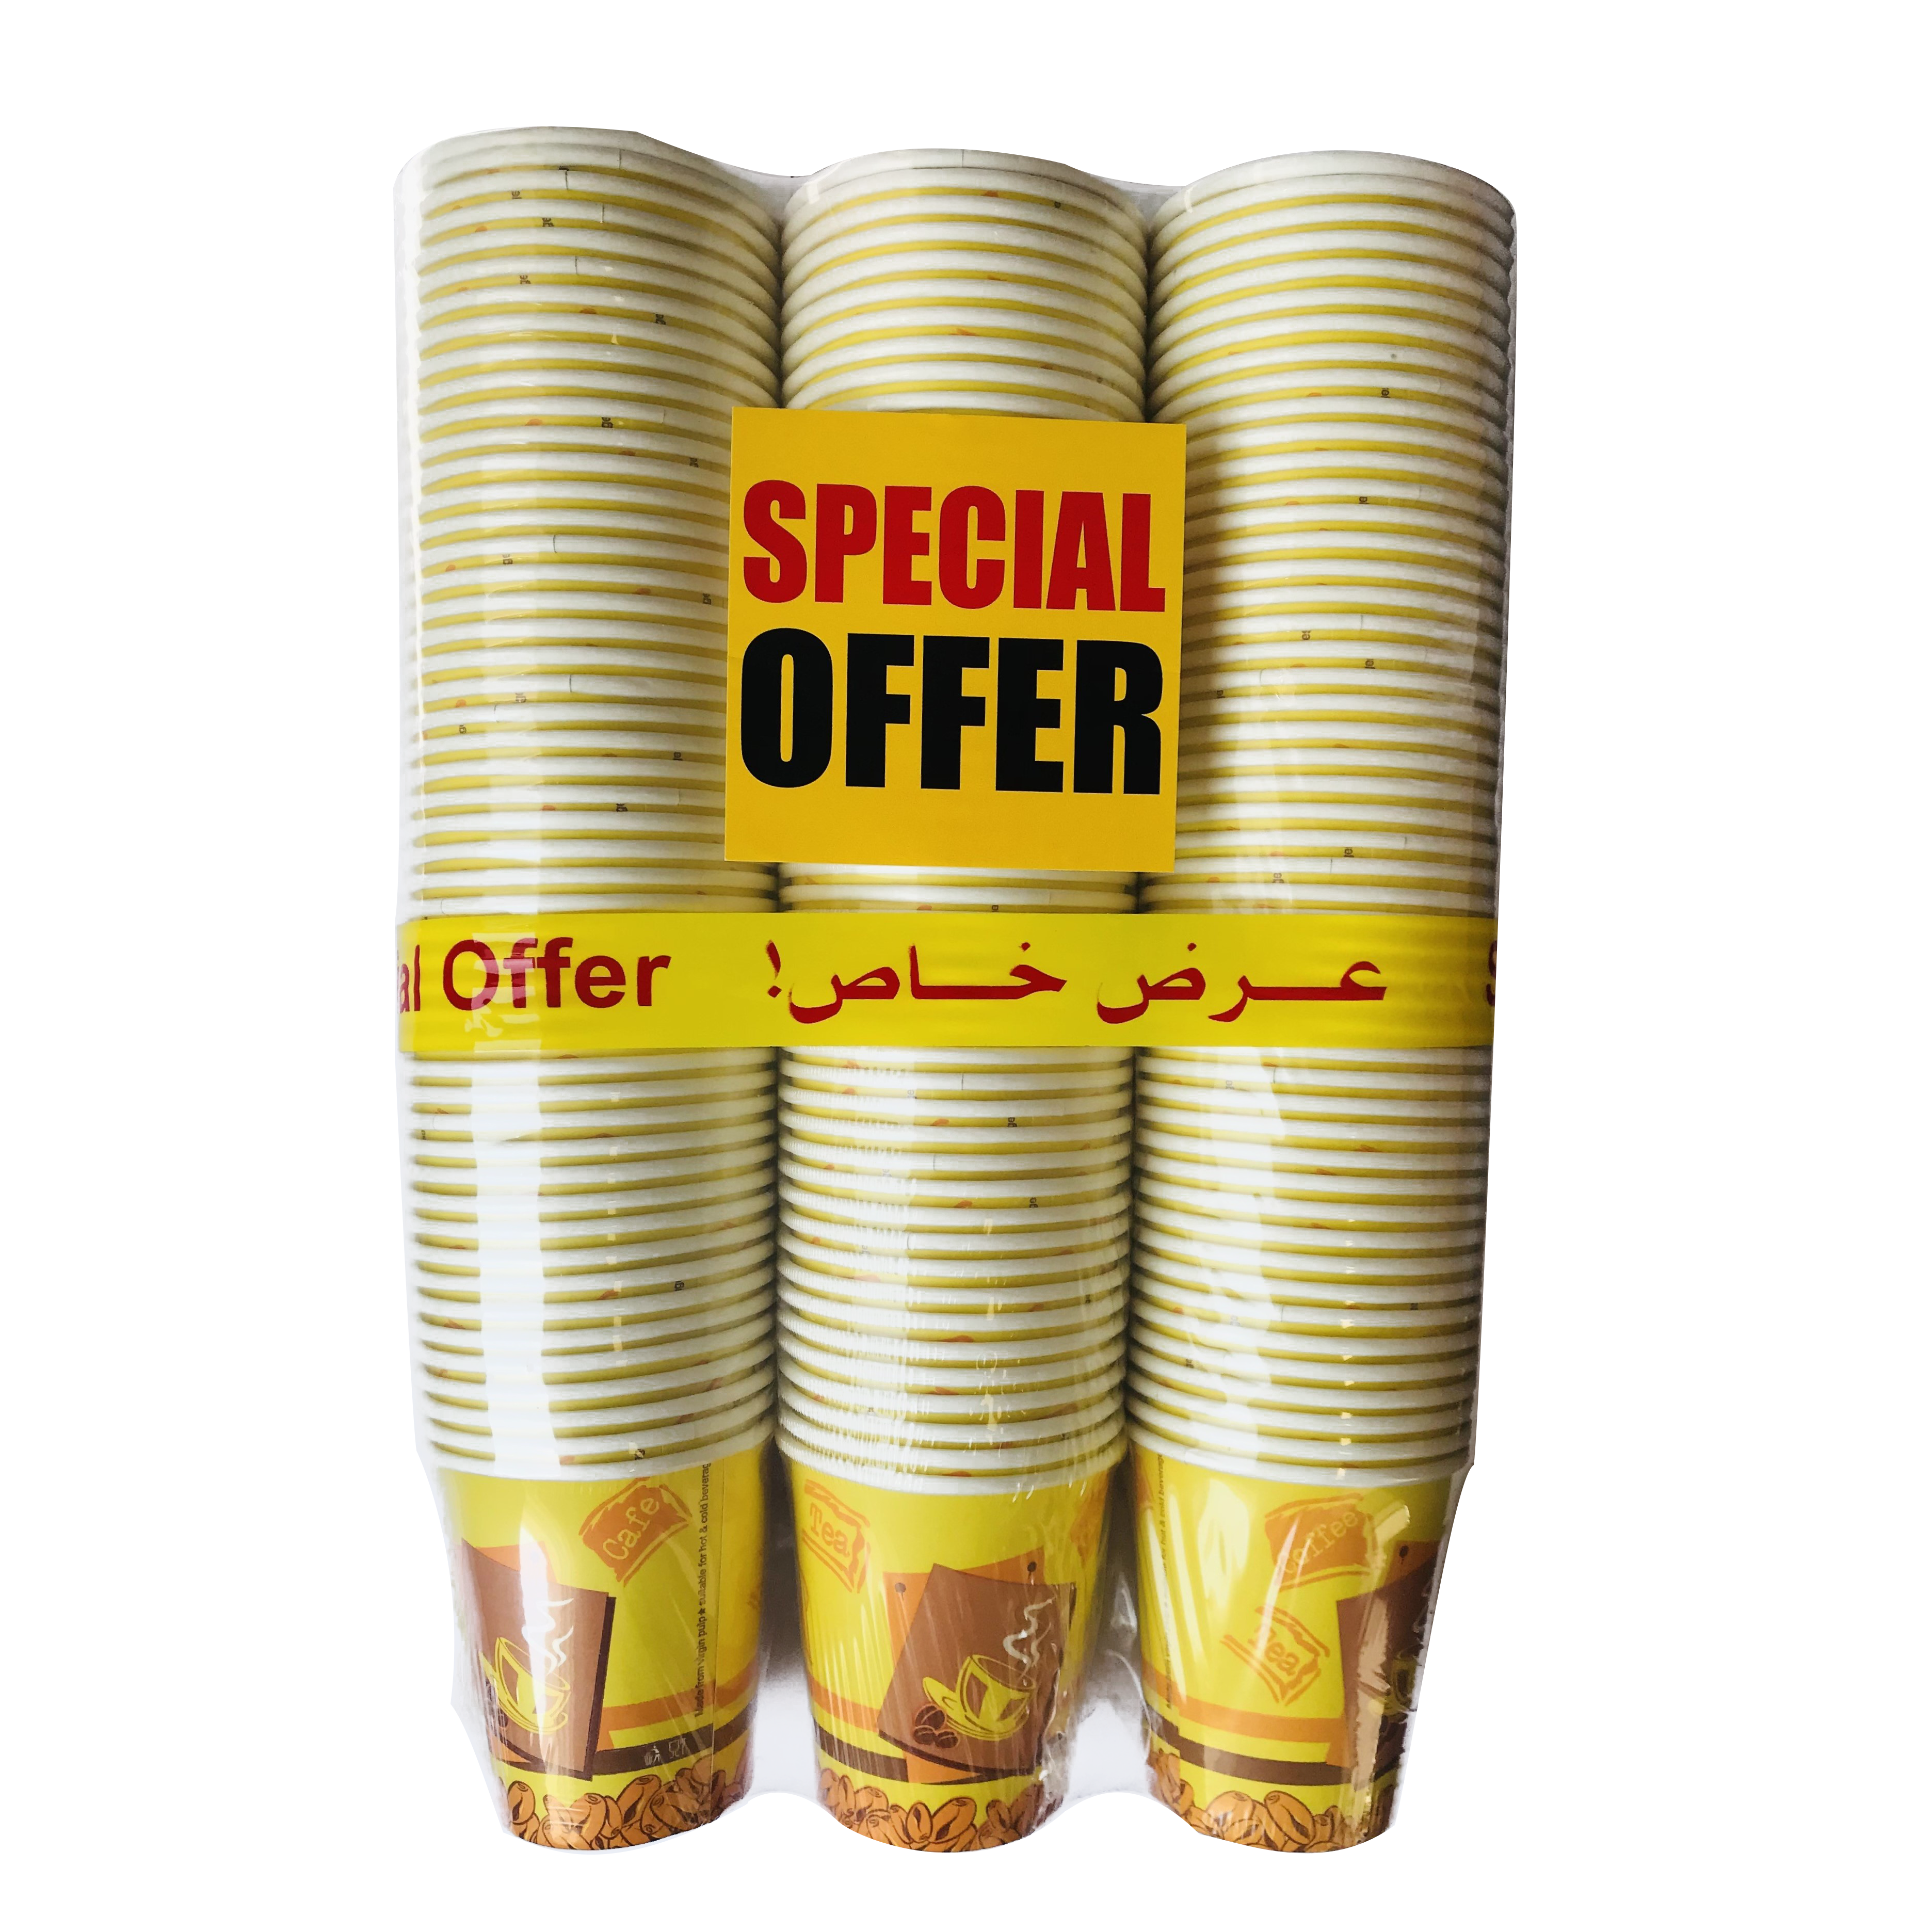 7 Oz Paper Cup without Handle (Offer Pack)